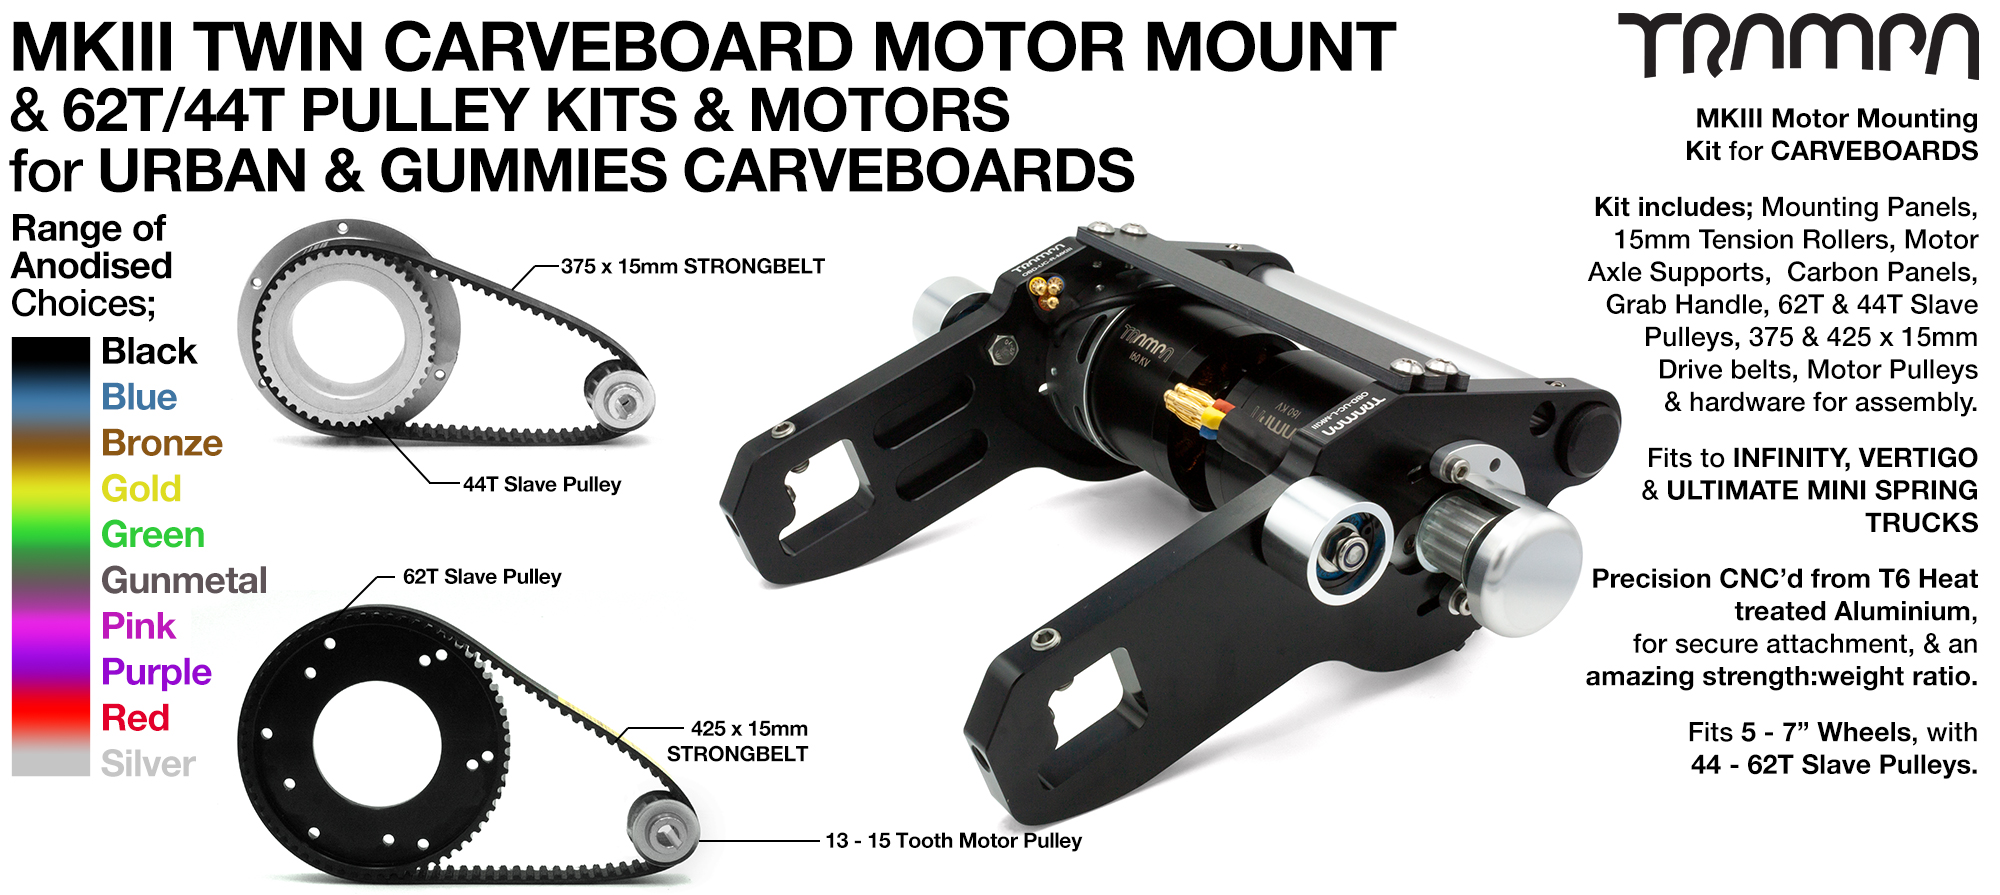 MkIII 2in1 CARVEBOARD Motormount with 44 tooth URBAN & 62 tooth URBAN Pulleys & TRAMPA Motor - TWIN